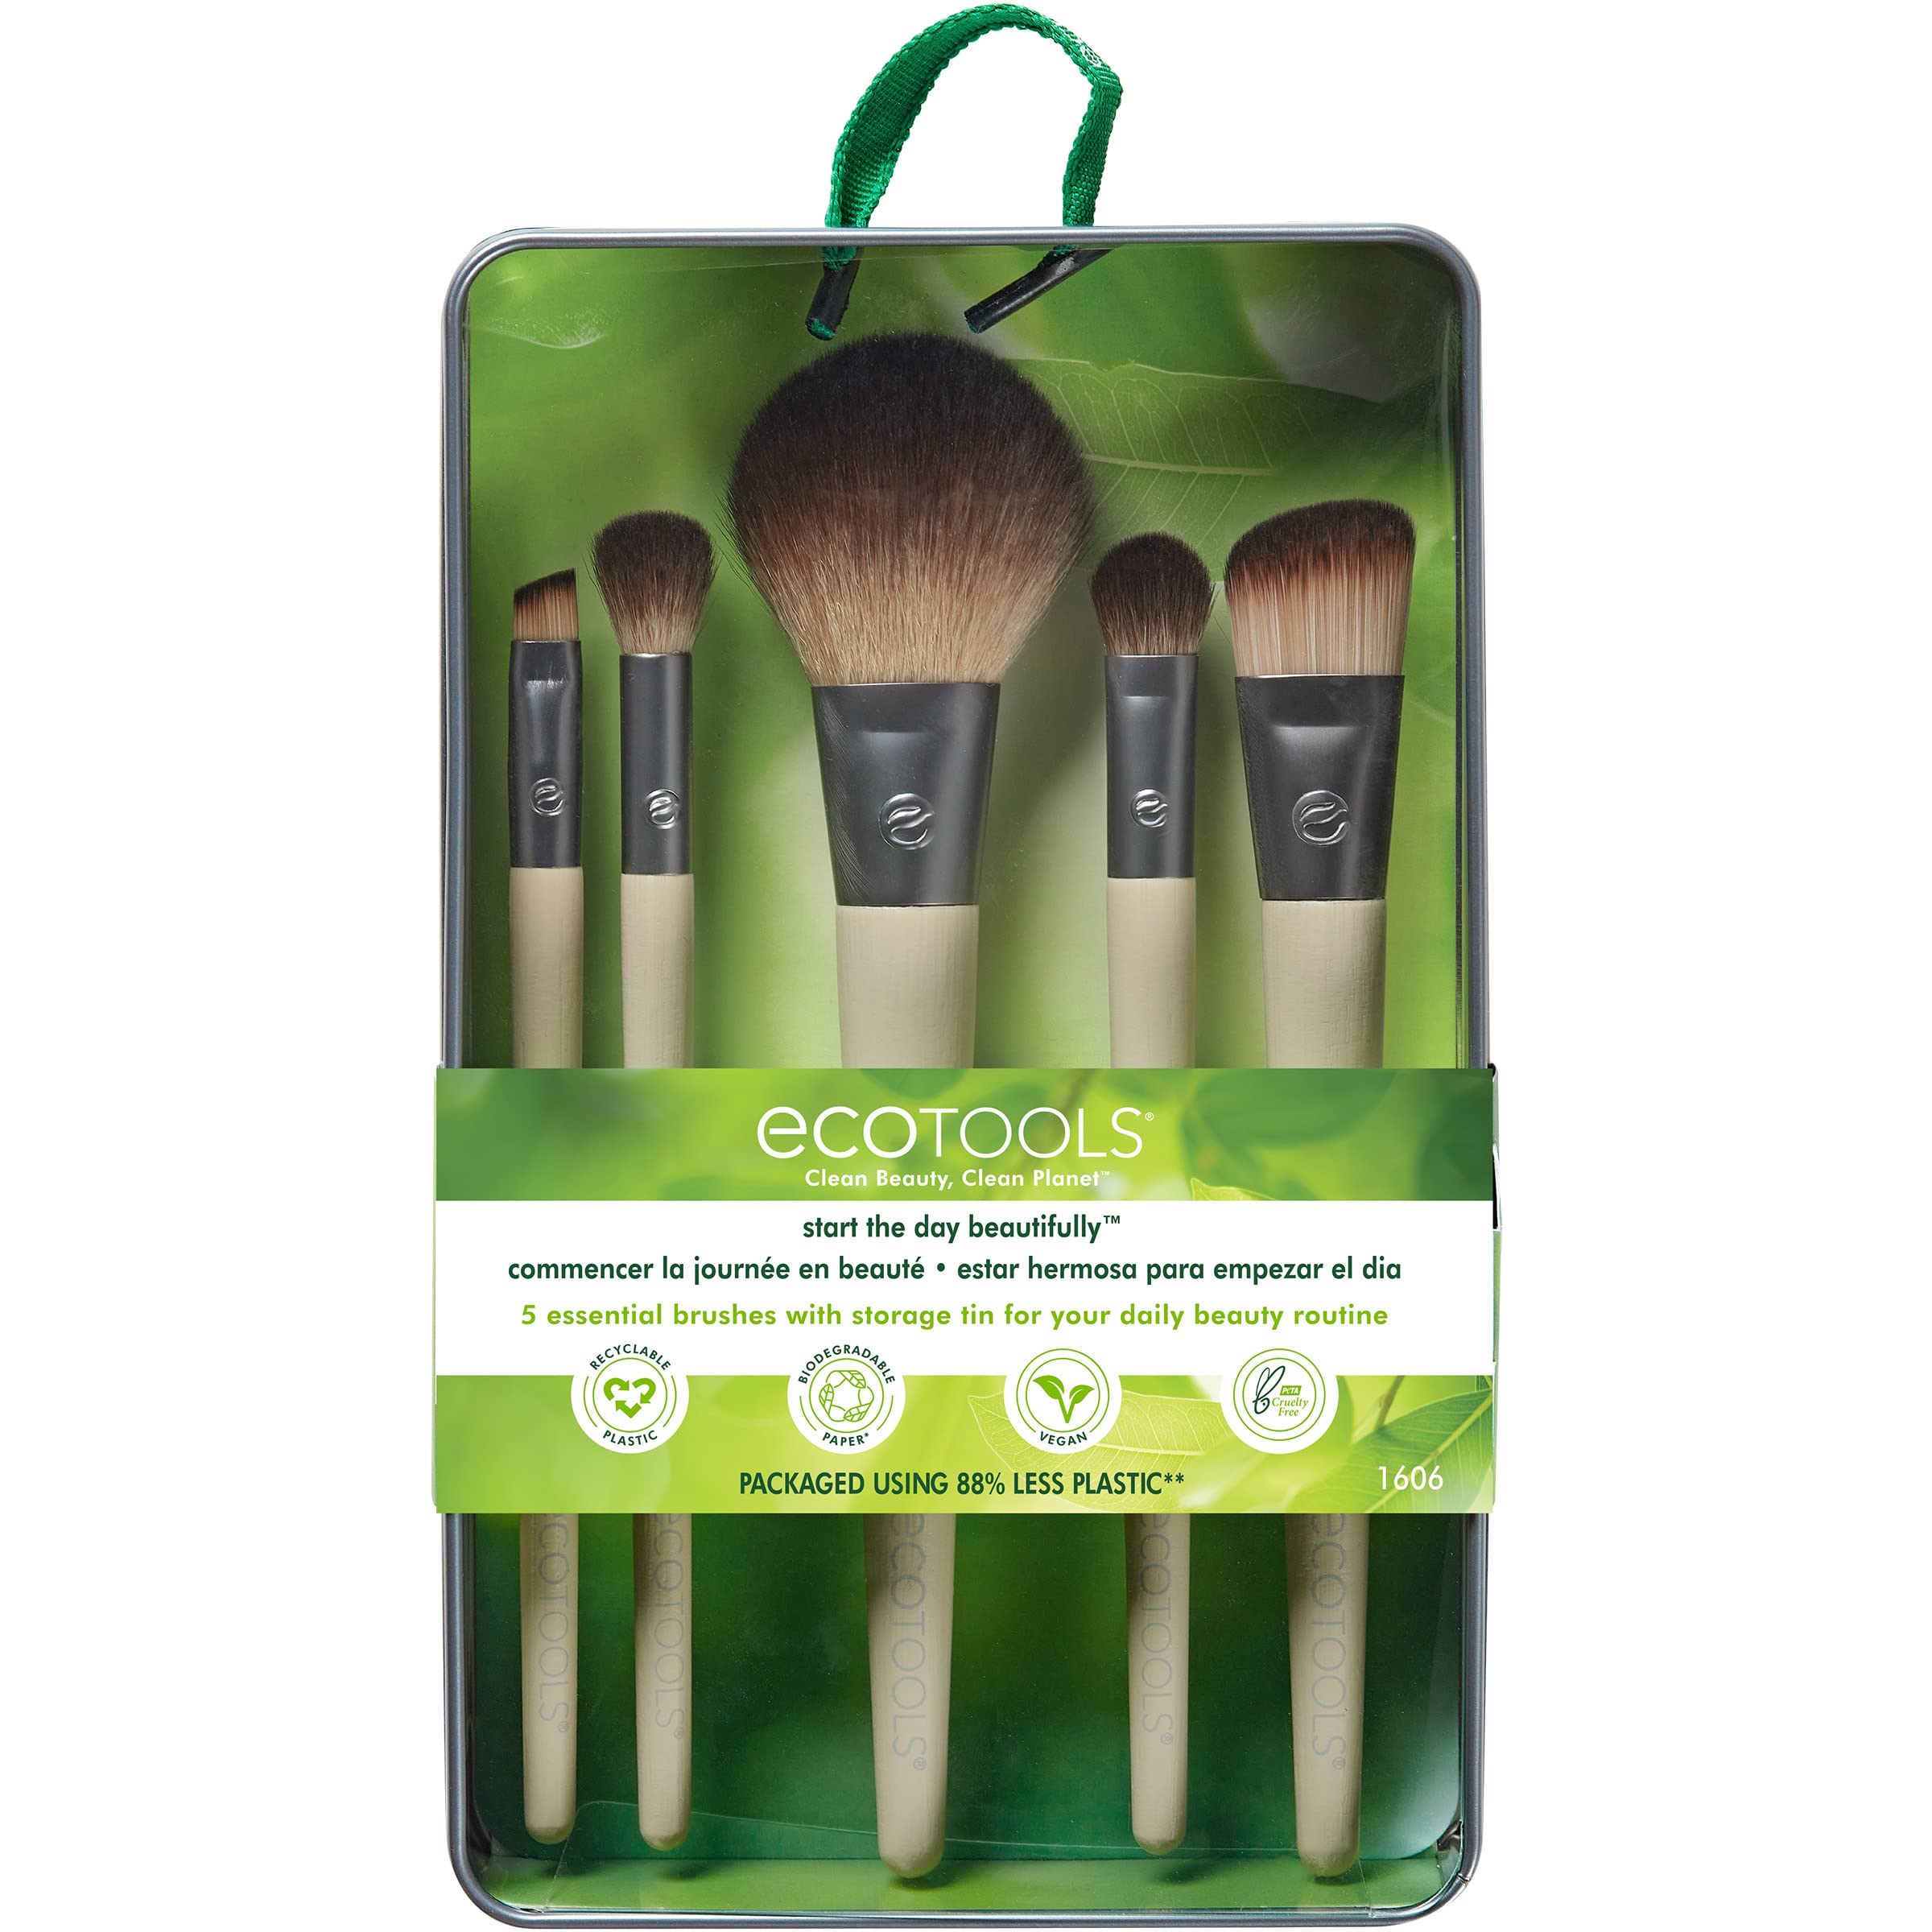 EcoTools Start The Day Beautifully Makeup Brush Kit, For Eyeshadow, Foundation, Blush, & Concealer, With Storage Tray, Travel Friendly Makeup Brush Staples, Eco Friendly, Cruelty Free, 6 Piece Set